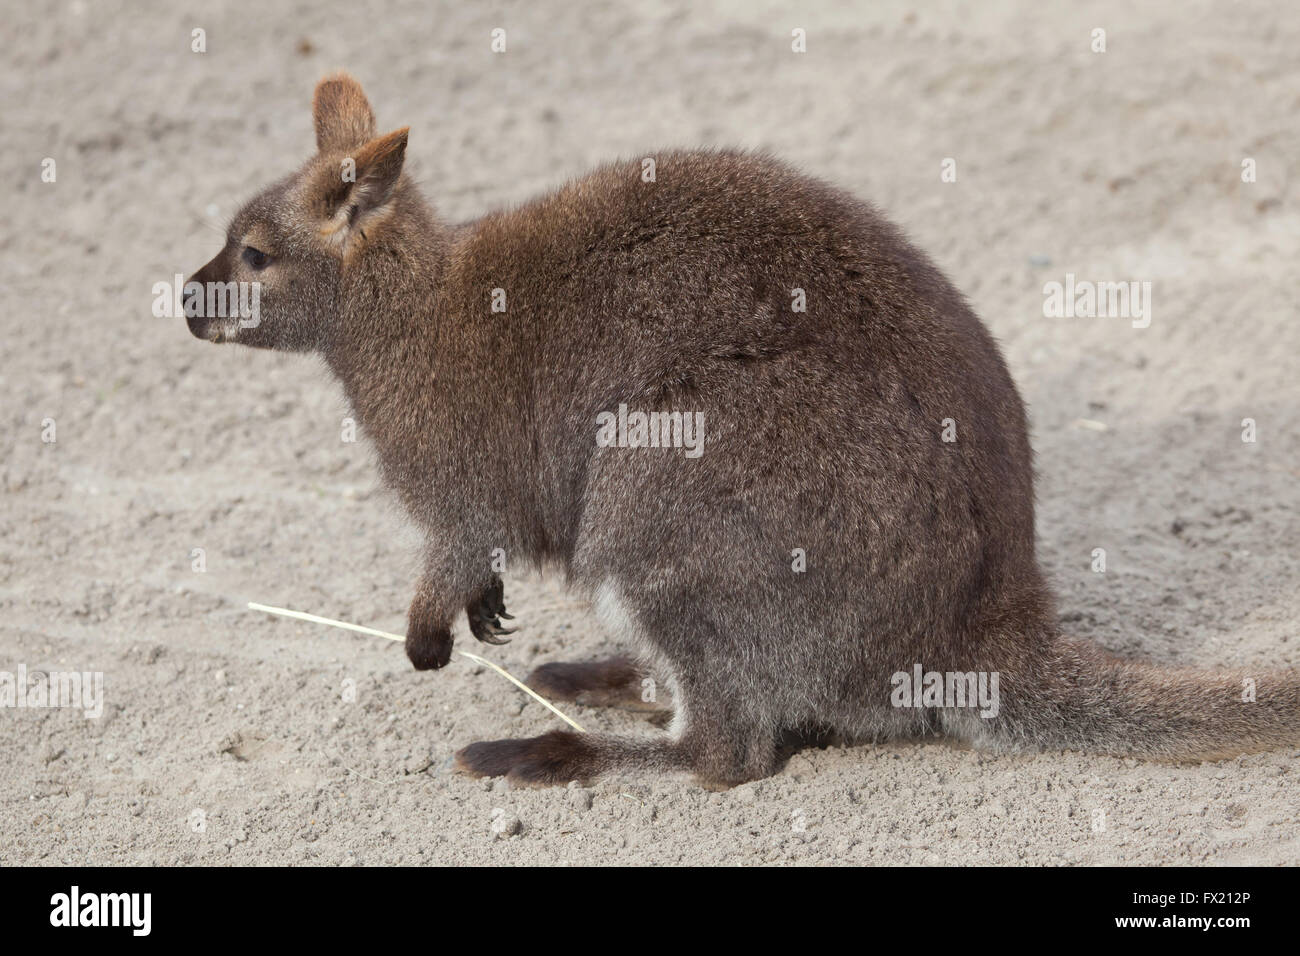 Red-necked wallaby (Macropus rufogriseus), also known as the Bennett's wallaby at Budapest Zoo in Budapest, Hungary. Stock Photo